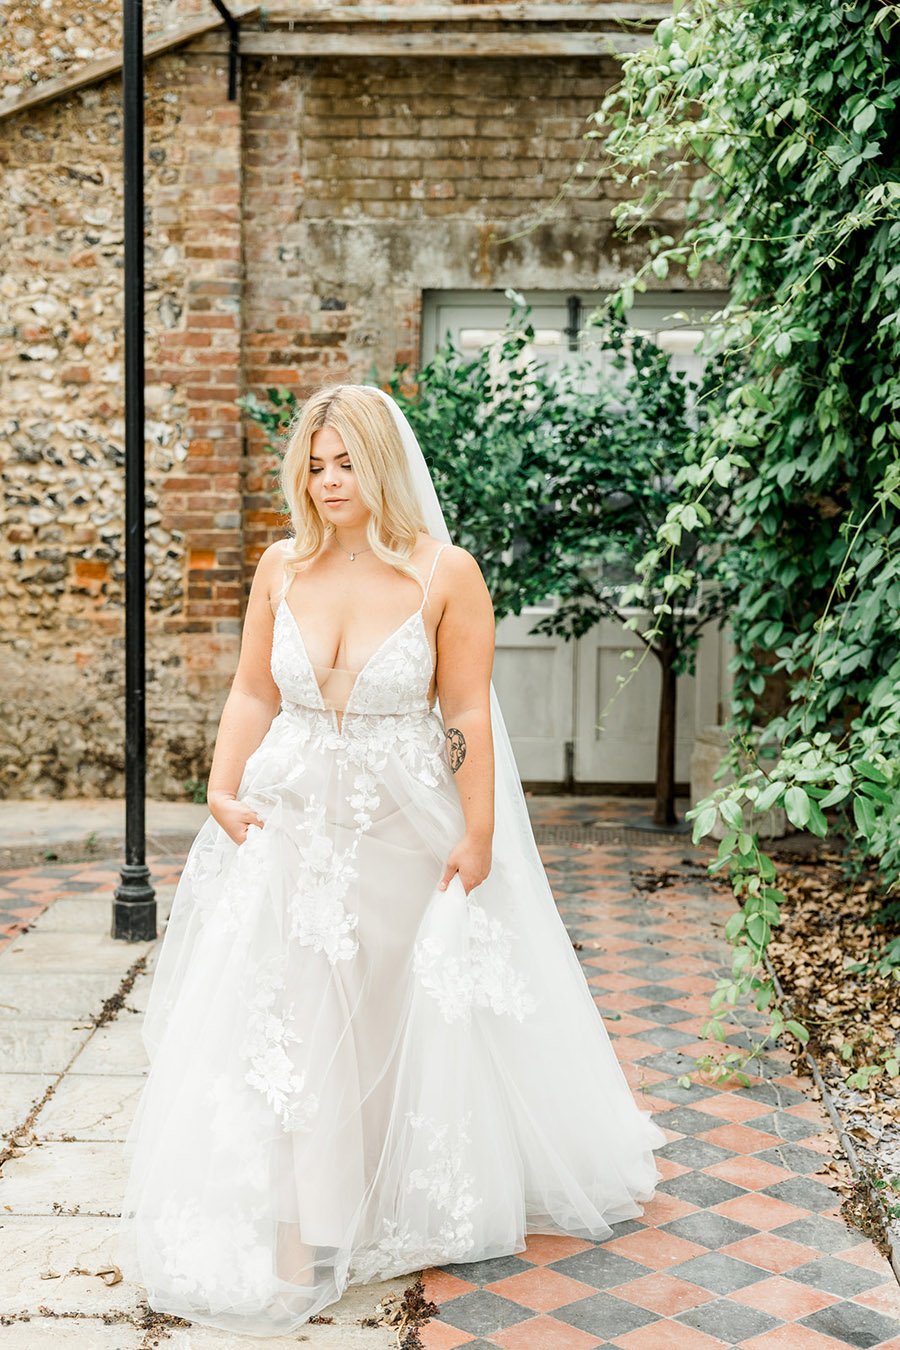 Modern intimate wedding styling inspiration from Slindon House, image credit Kelsie Scully (7)